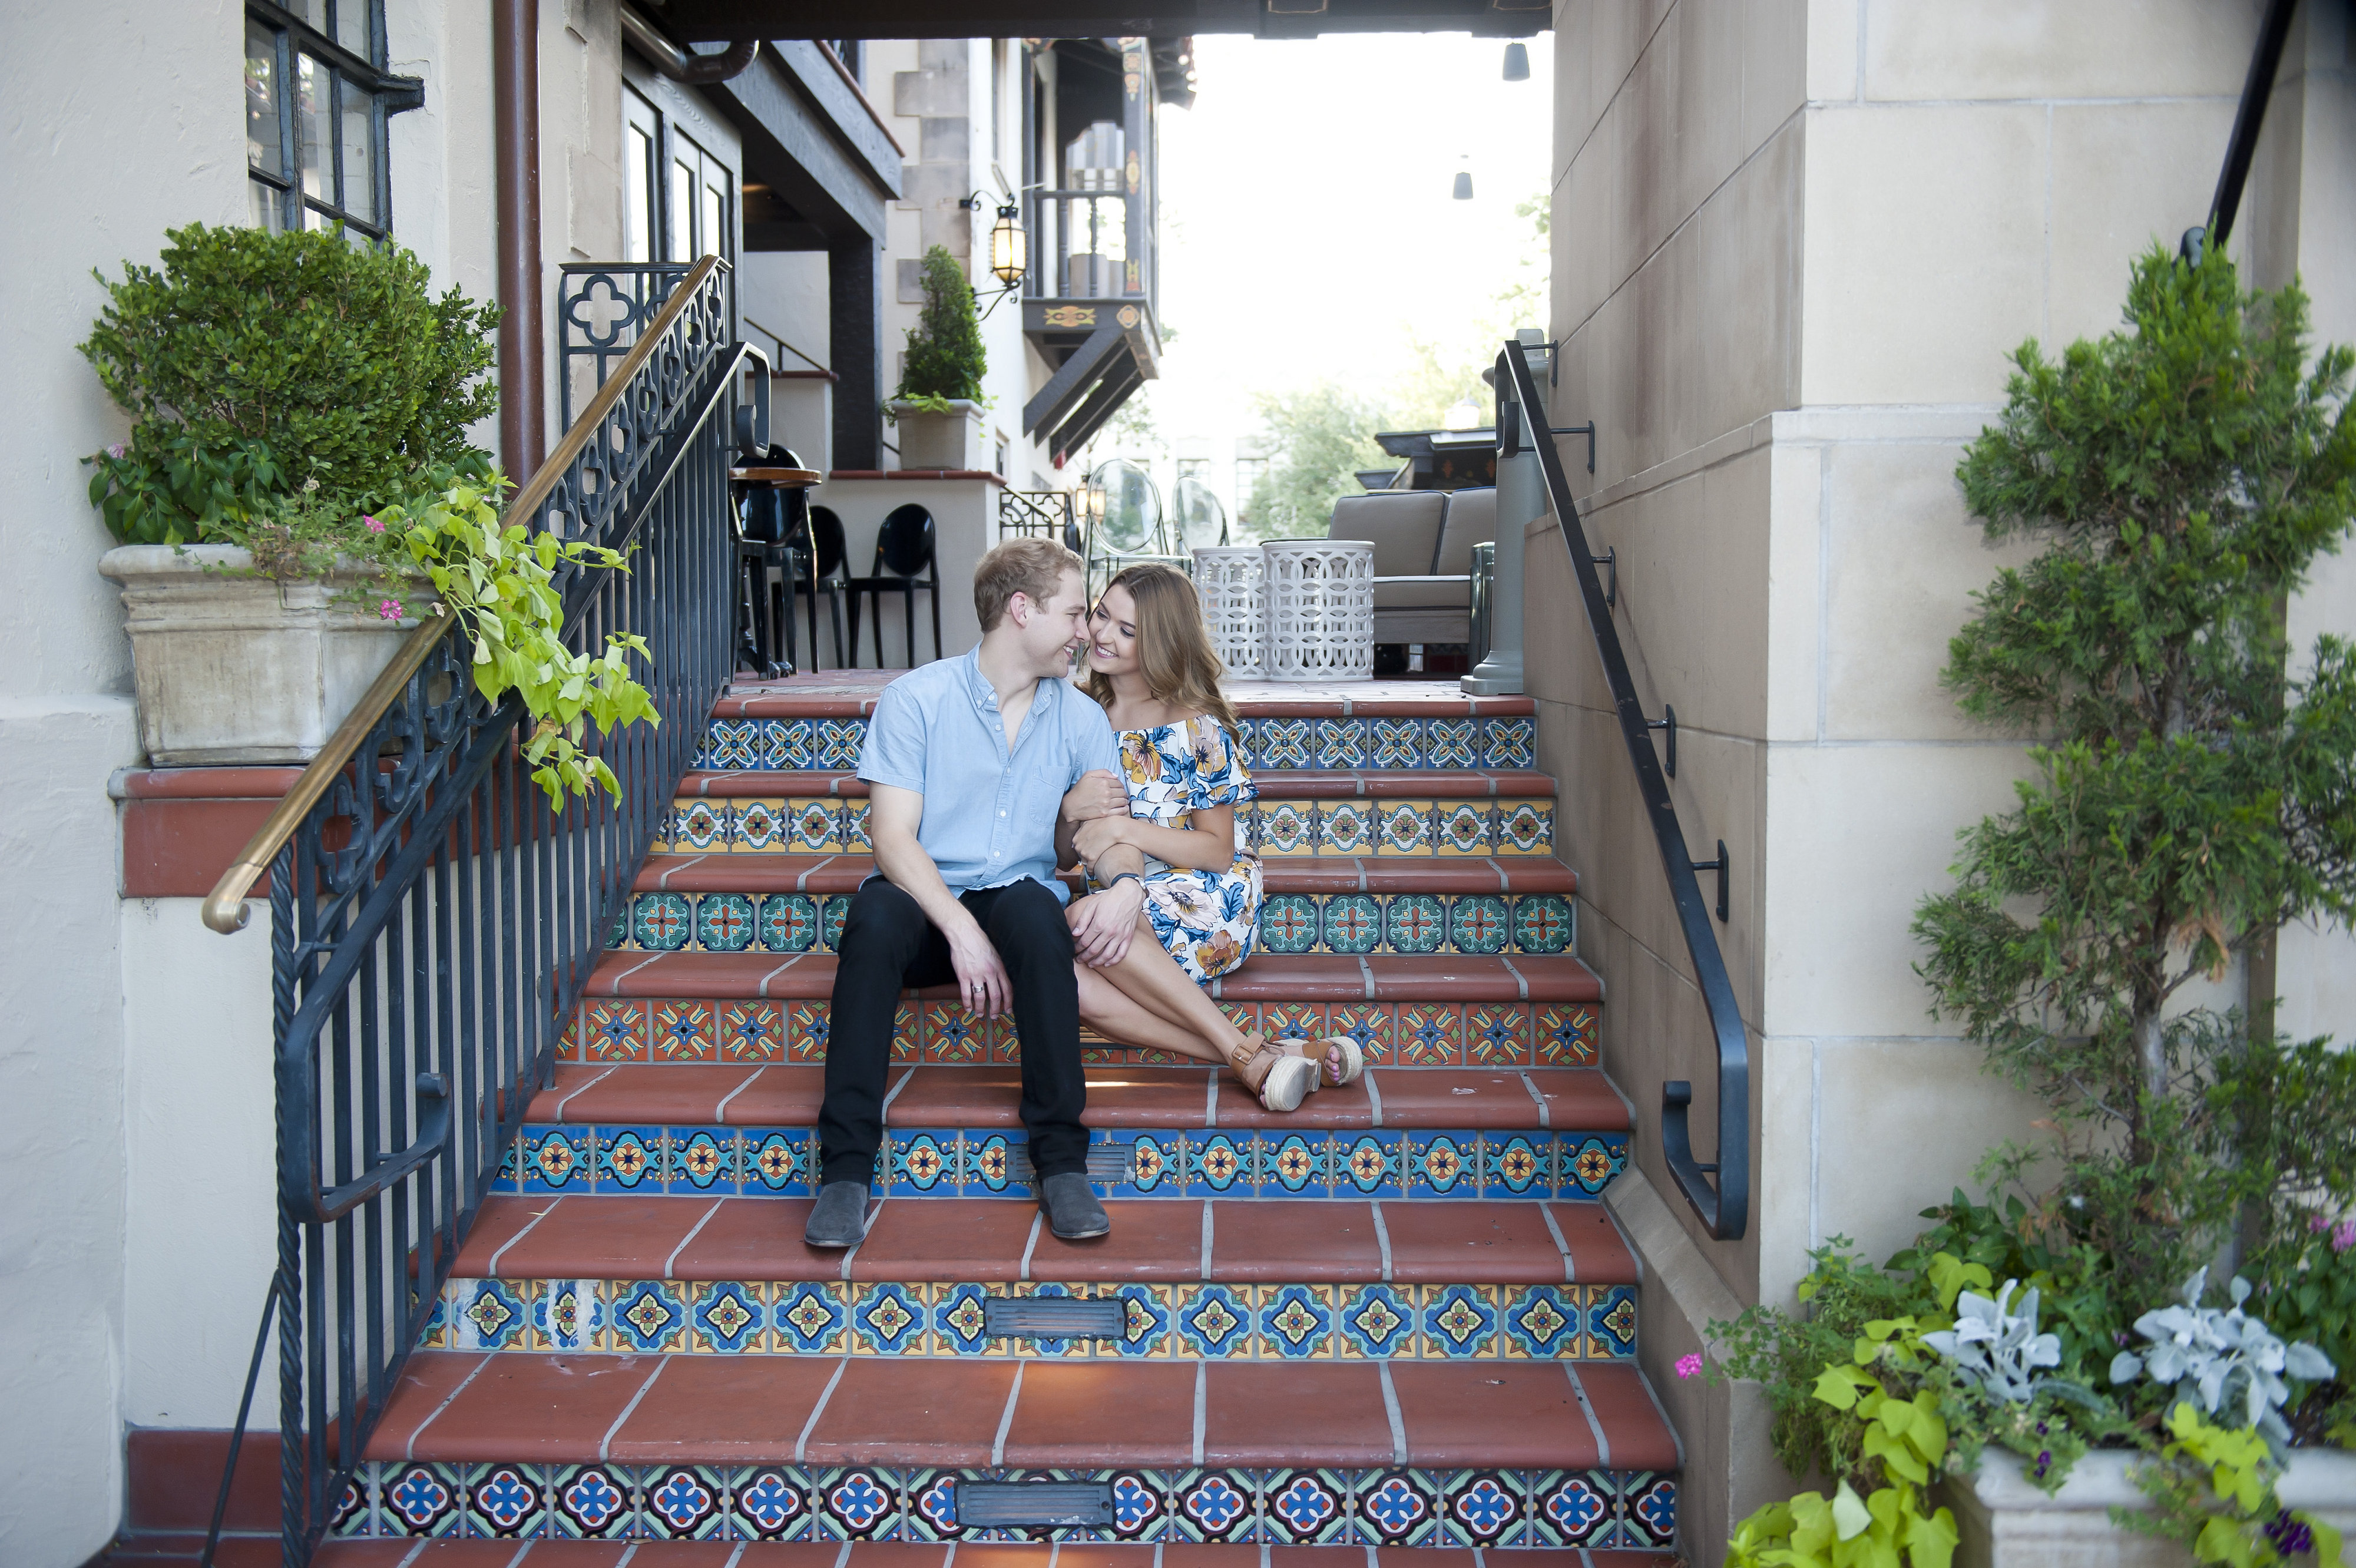 Couple Sitting and Embracing on Colorful Steps